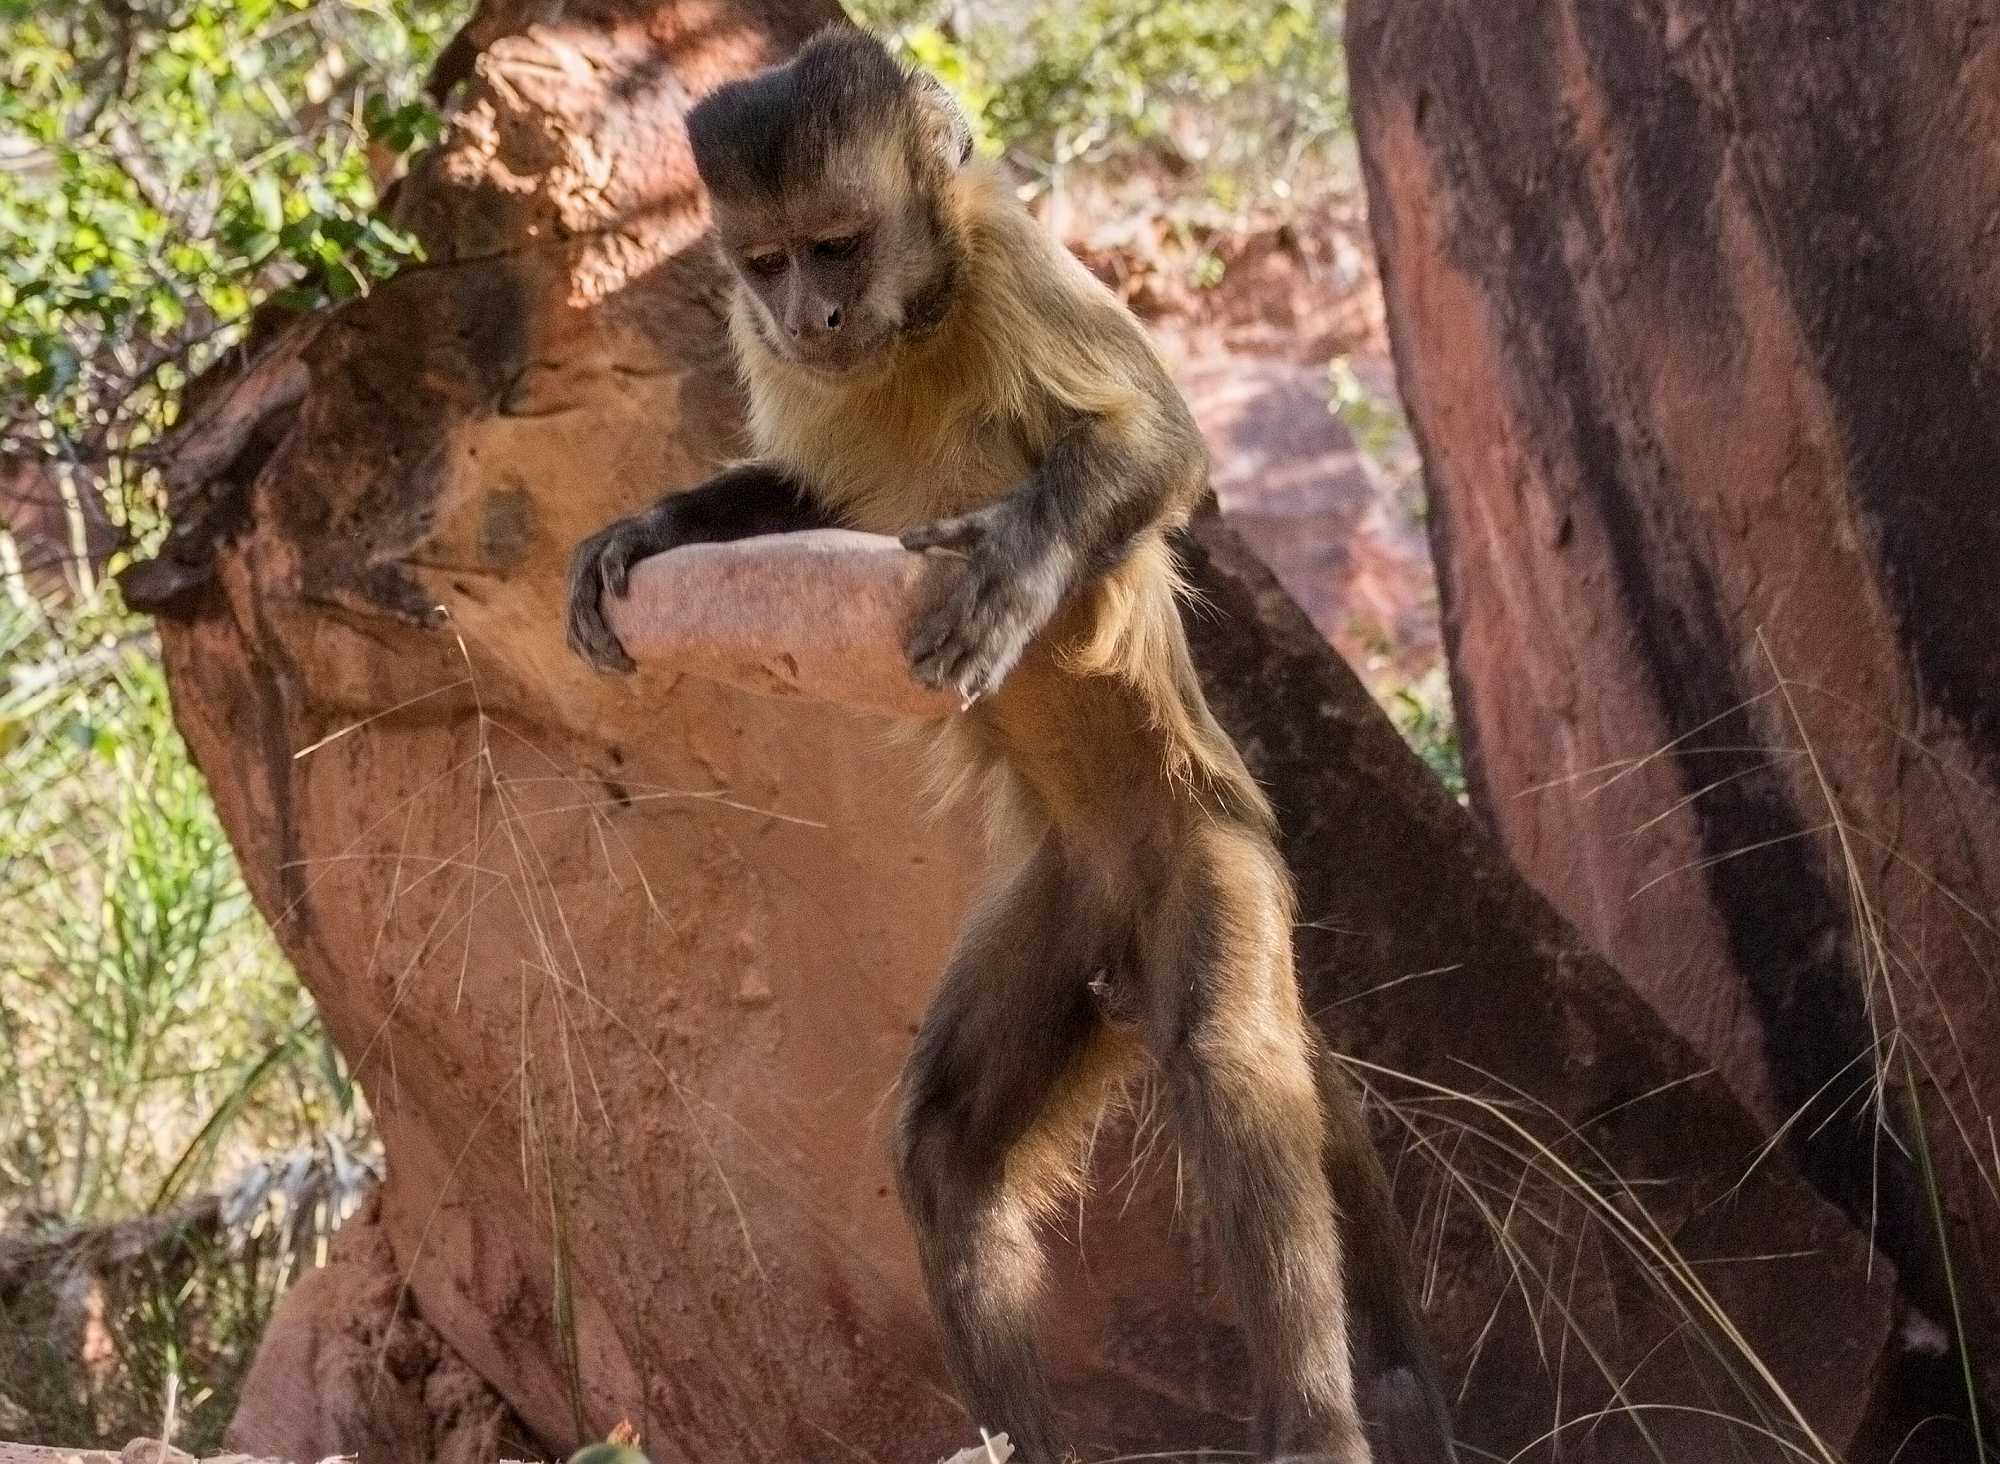 A capuchin monkey in Brazil hoists a stone tool to crack open nuts. Luca Antonio Marino, CC BY-ND